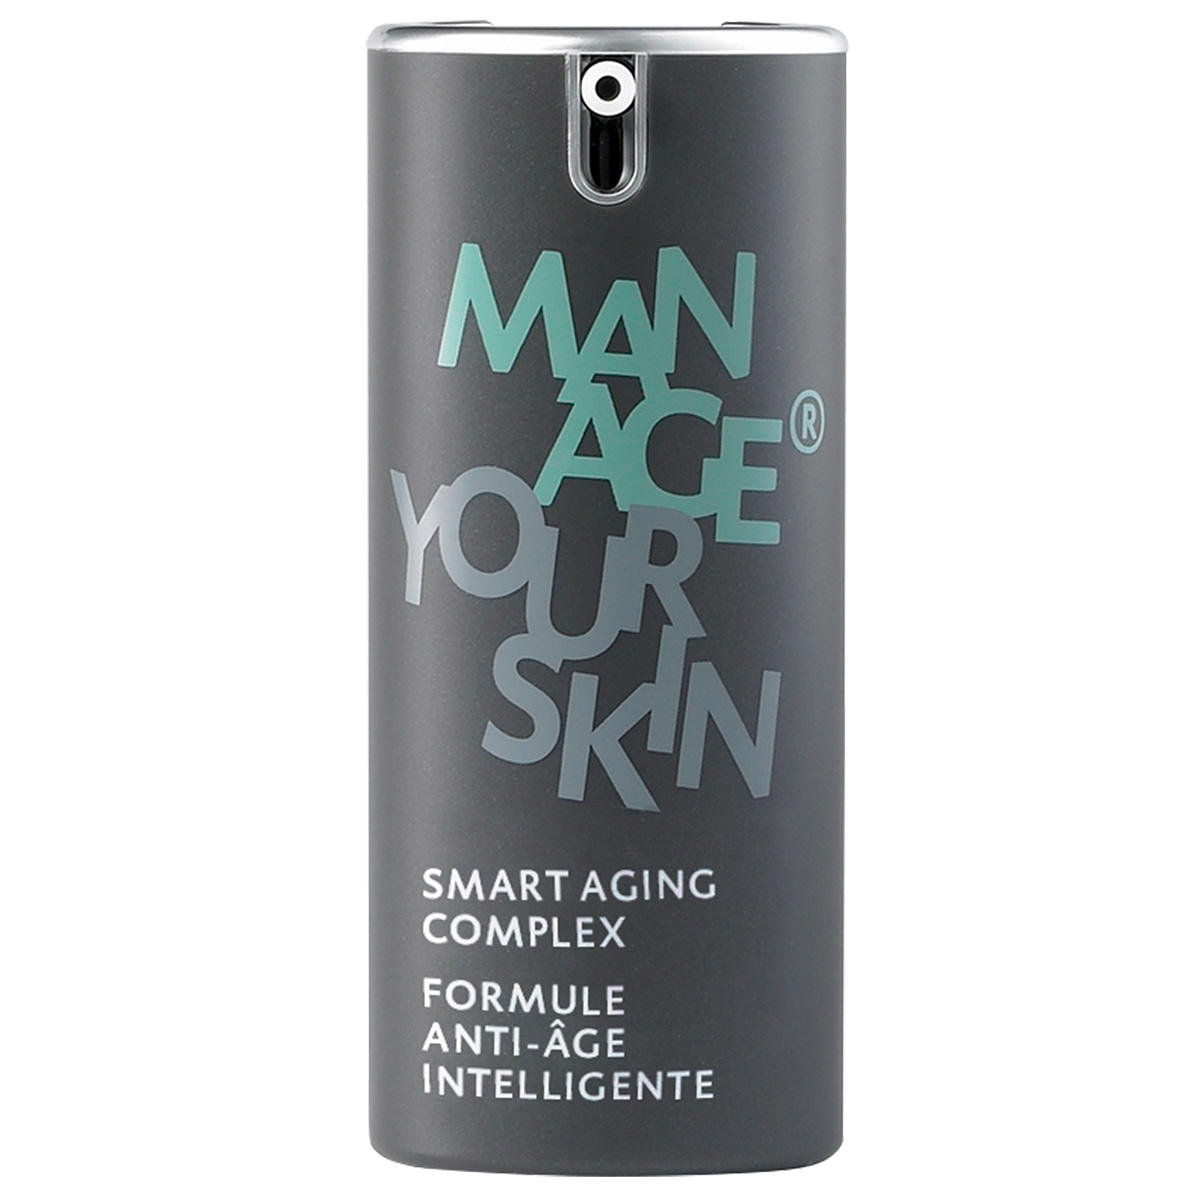 Manage Your Skin SMART AGING COMPLEX 50 ml - 1